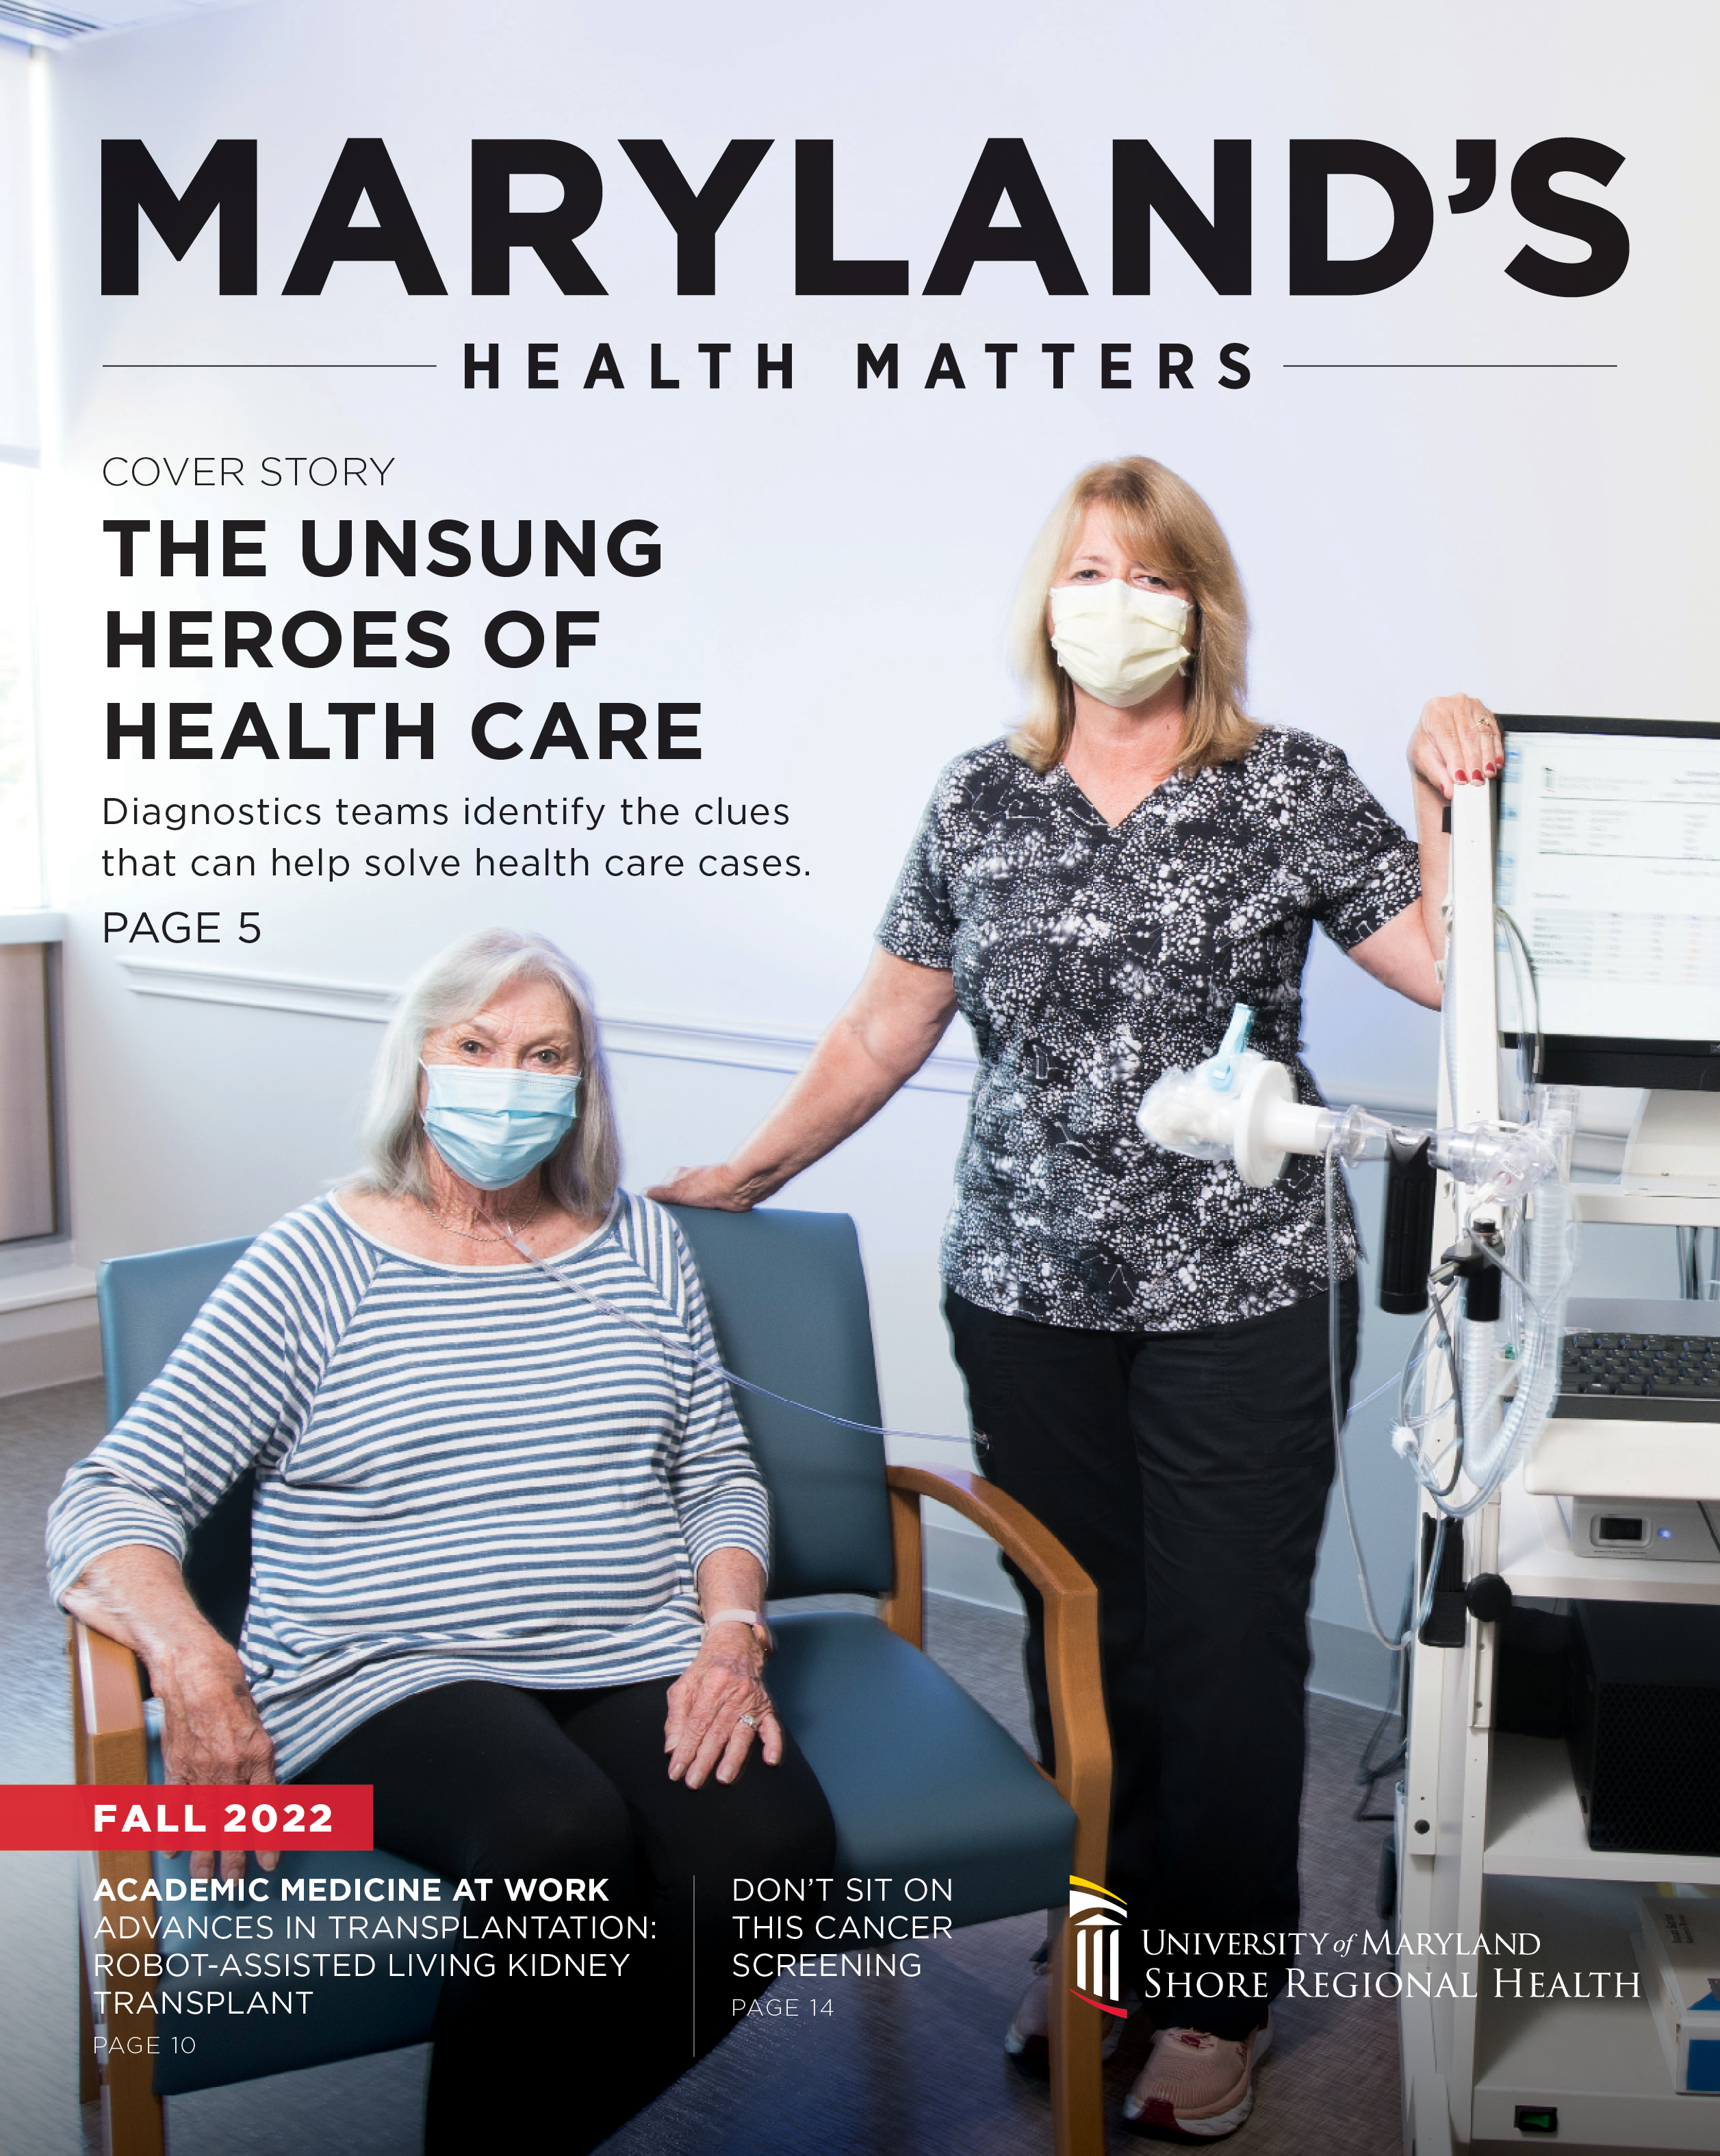 The cover of Maryland's Health Matters has two women on it. One woman is a respiratory therapist and is standing next to a pulmonary function machine, and the patient is sitting.